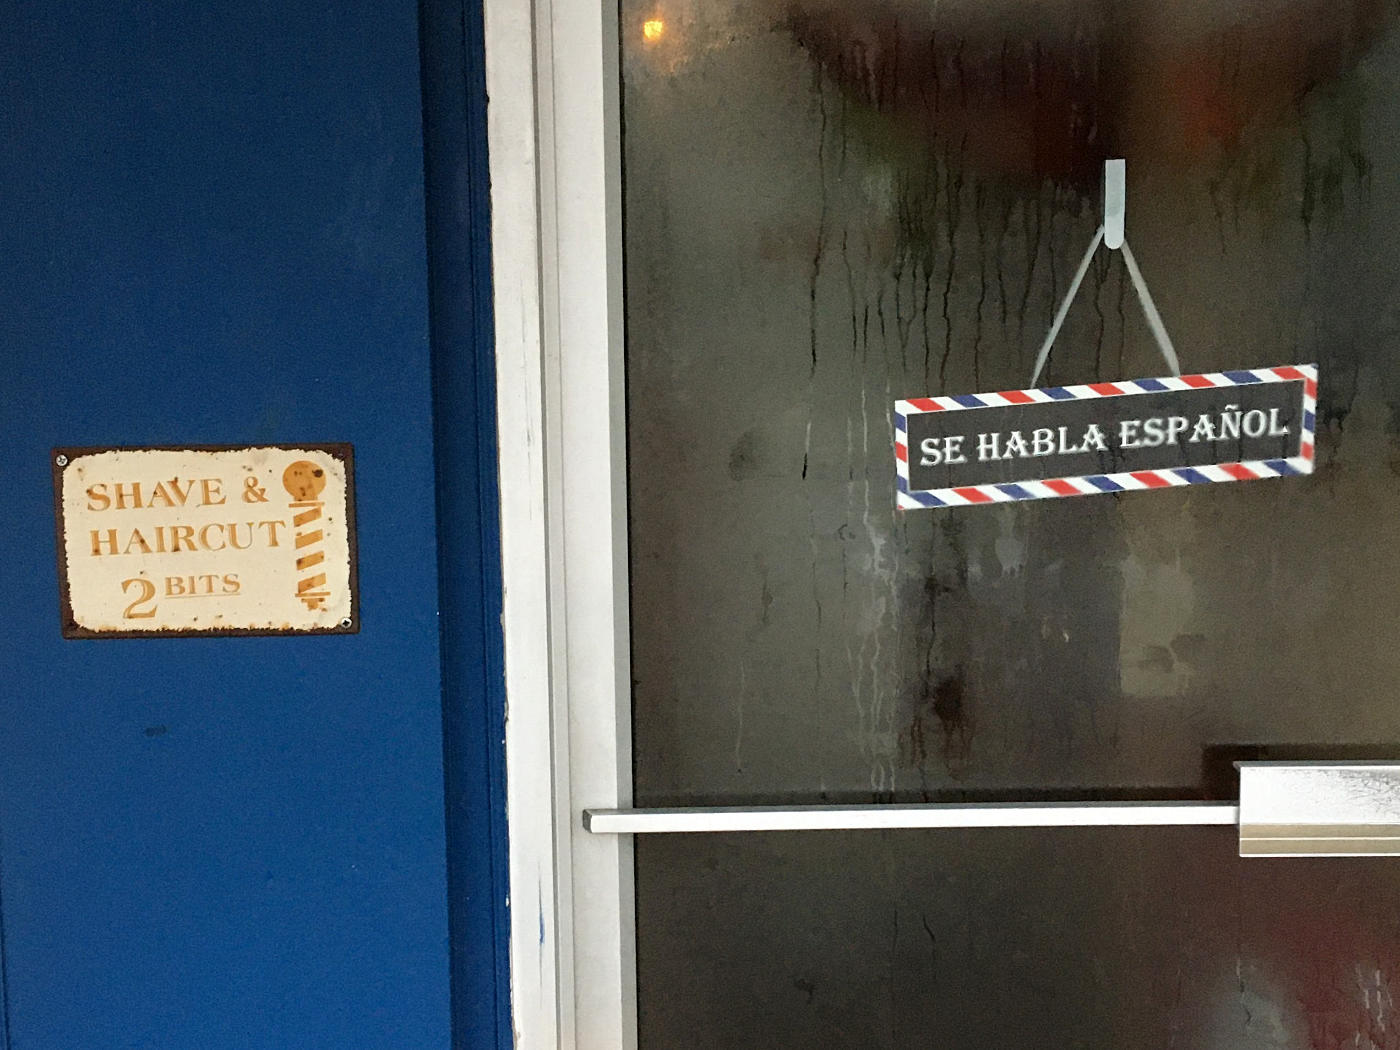 Faded sign on blue wall reading "SHAVE AND HAIRCUT 2 BITS" next to a glass door with a sign reading "Se Habla Español,"